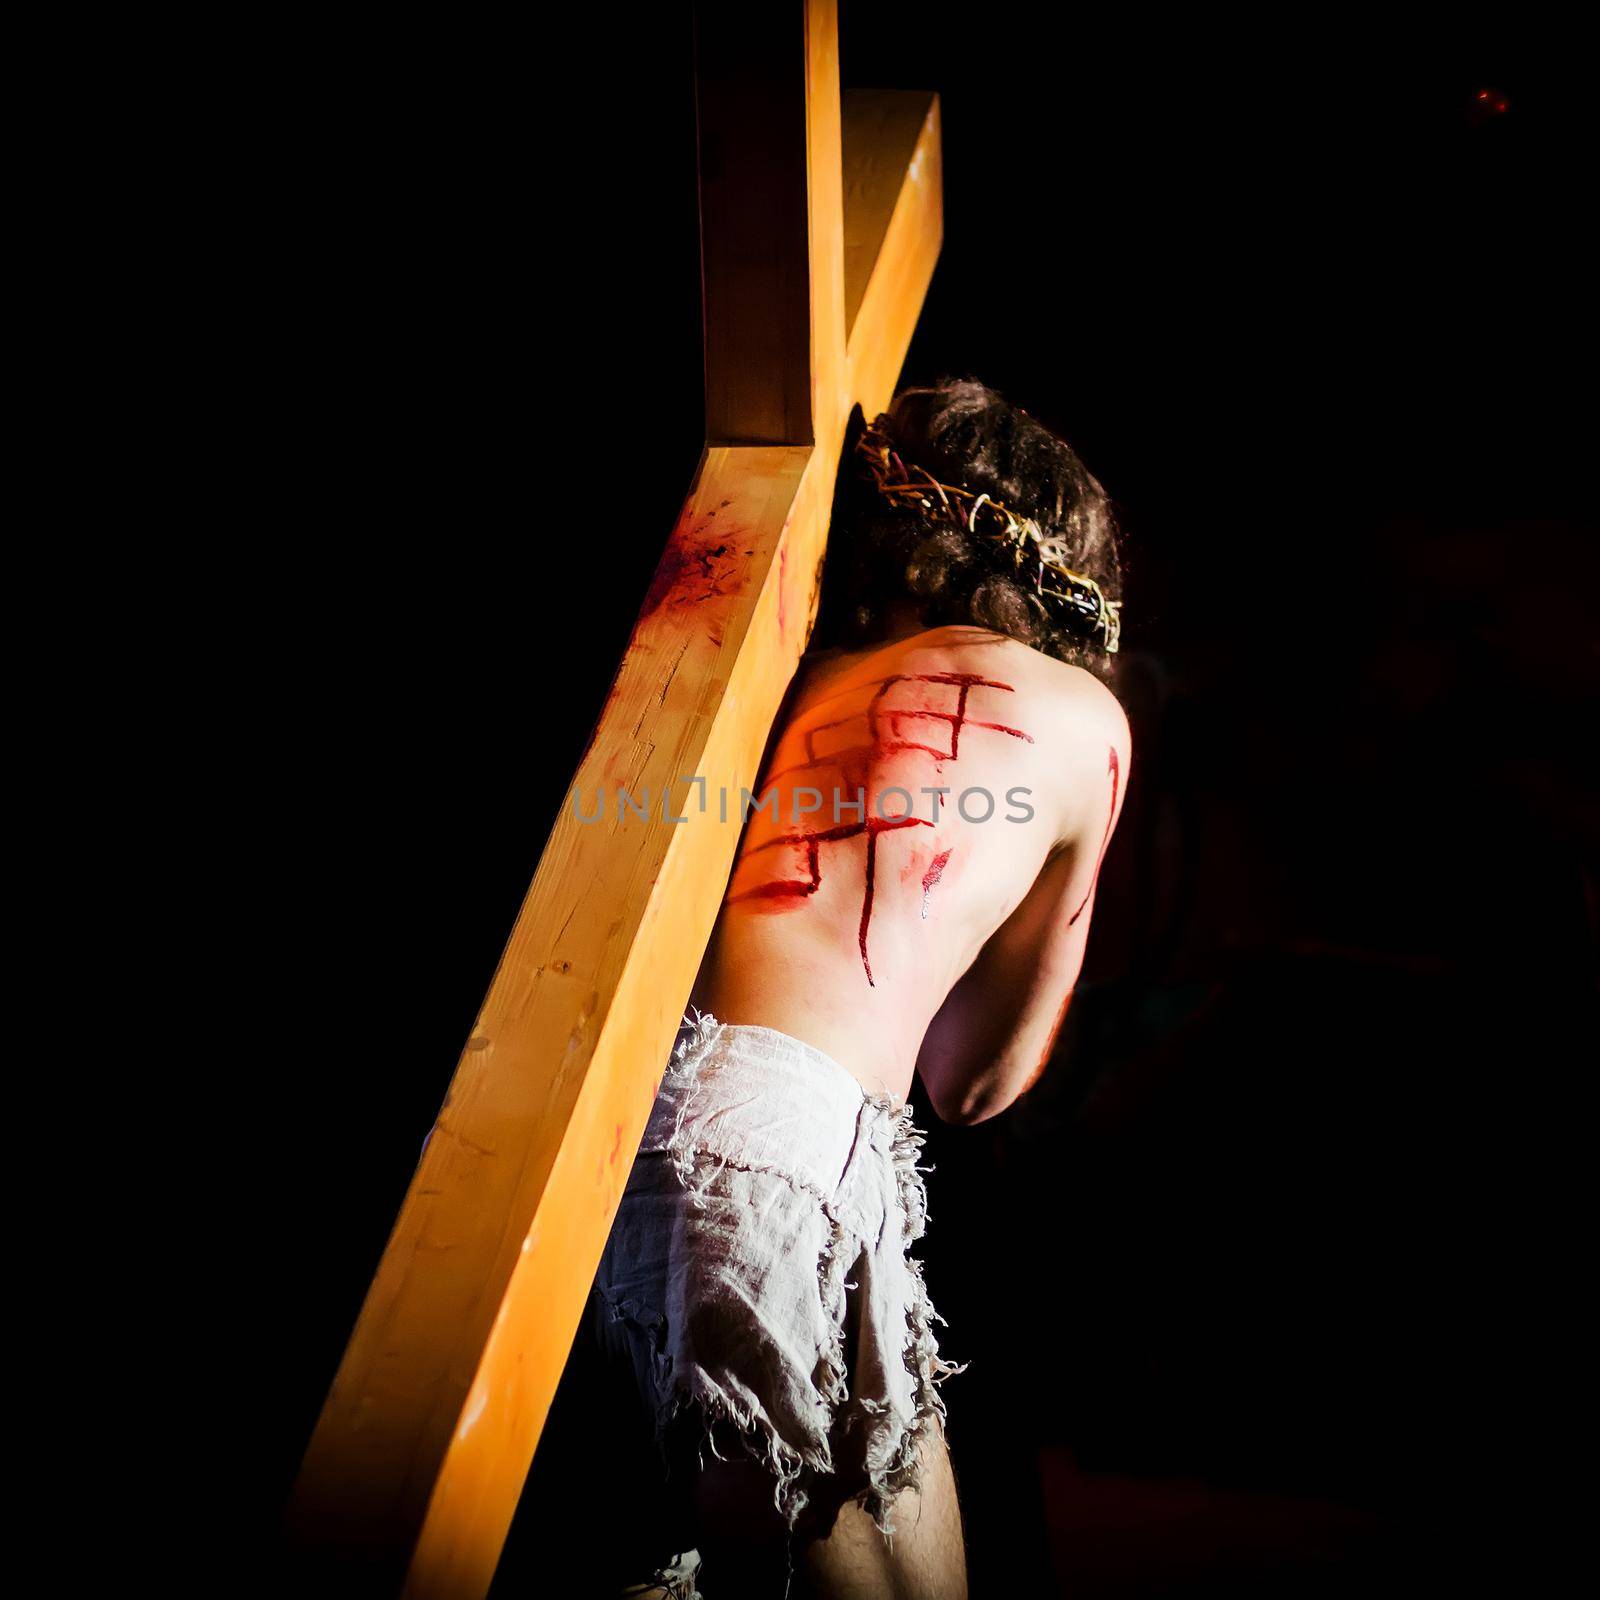 Jesus carrying the Cross into the darkness.Focus on back.